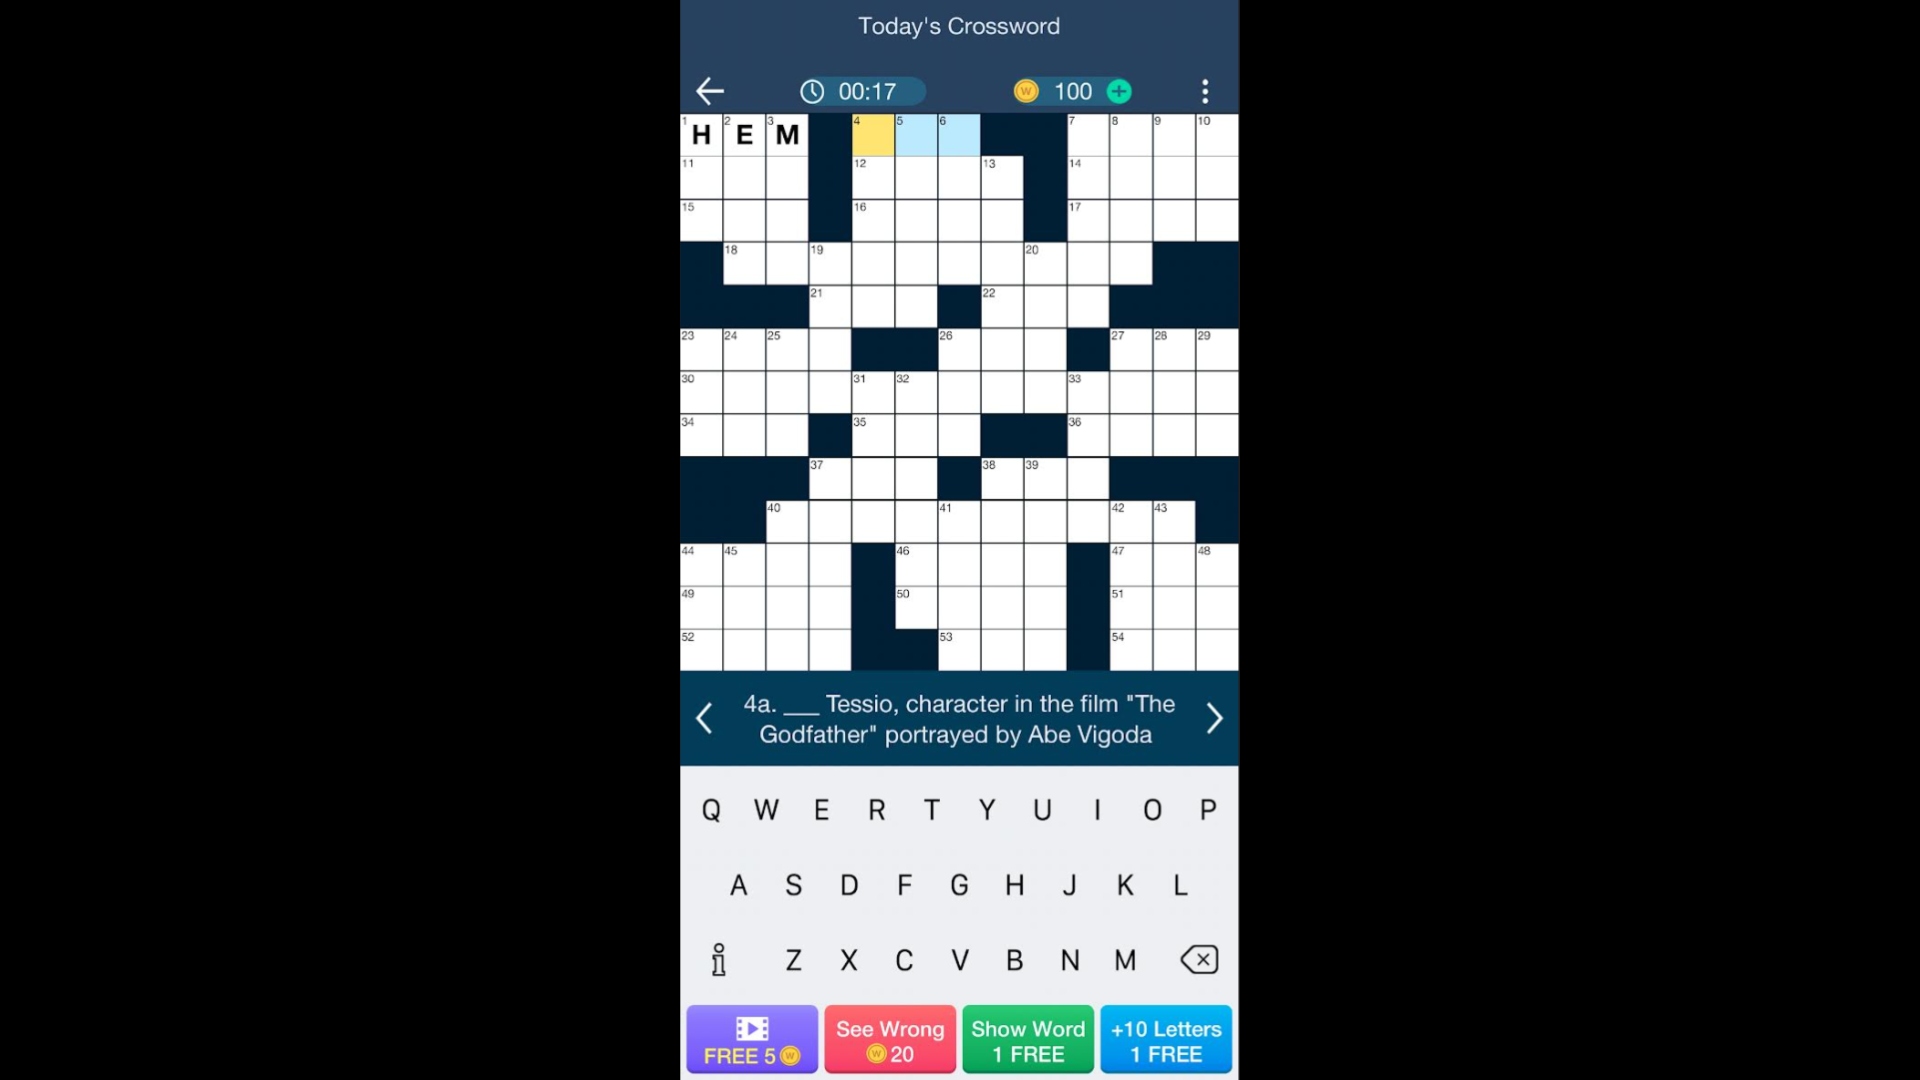 Addictive games - Daily Themed Crossword Puzzles. Image shows a crossword in progress.